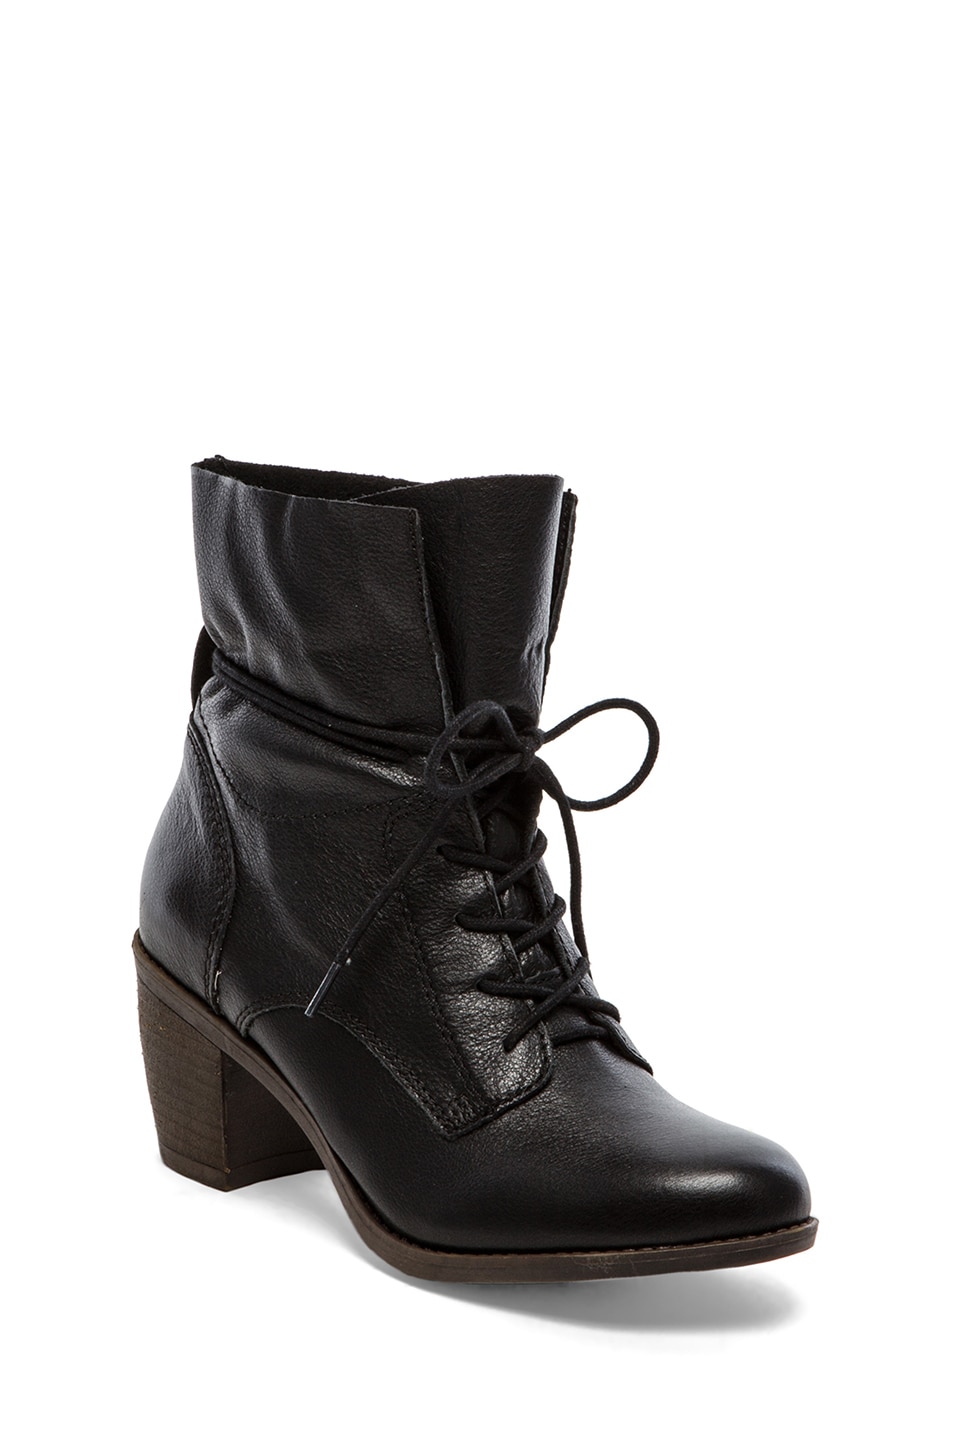 Steve Madden Gretchun Boot in Black Leather